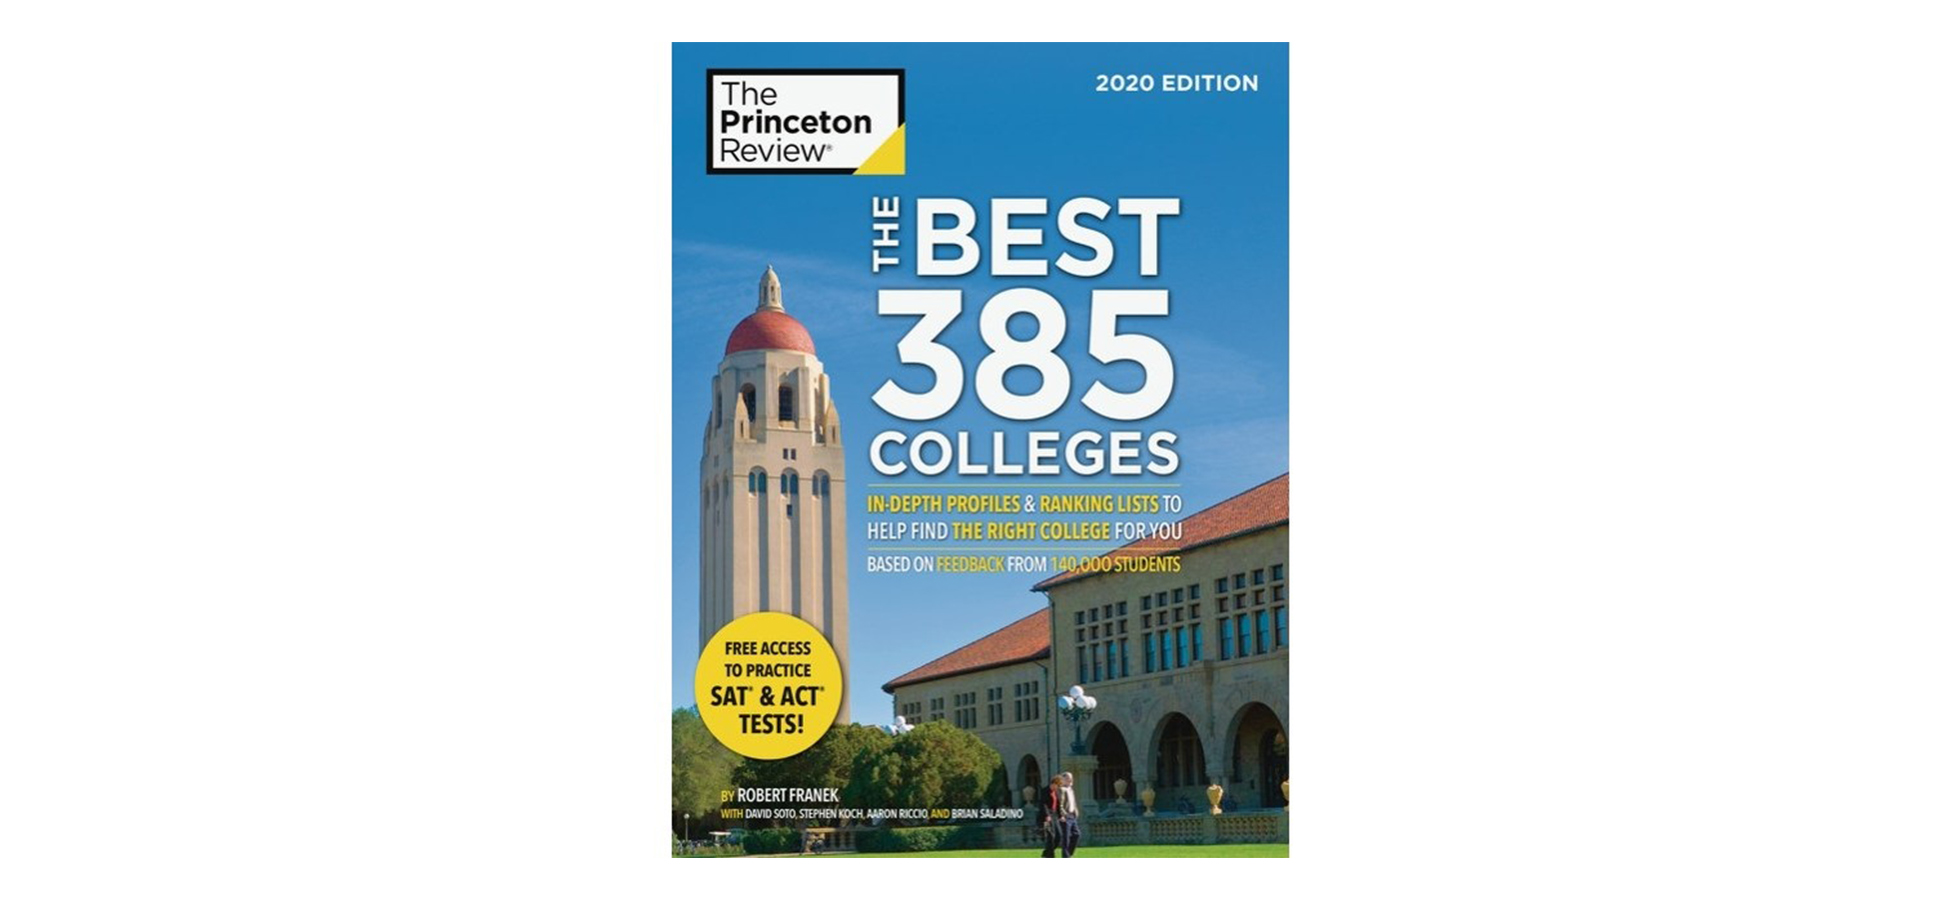 Assumption Named to The Princeton Review’s  “Best 385 Colleges” List